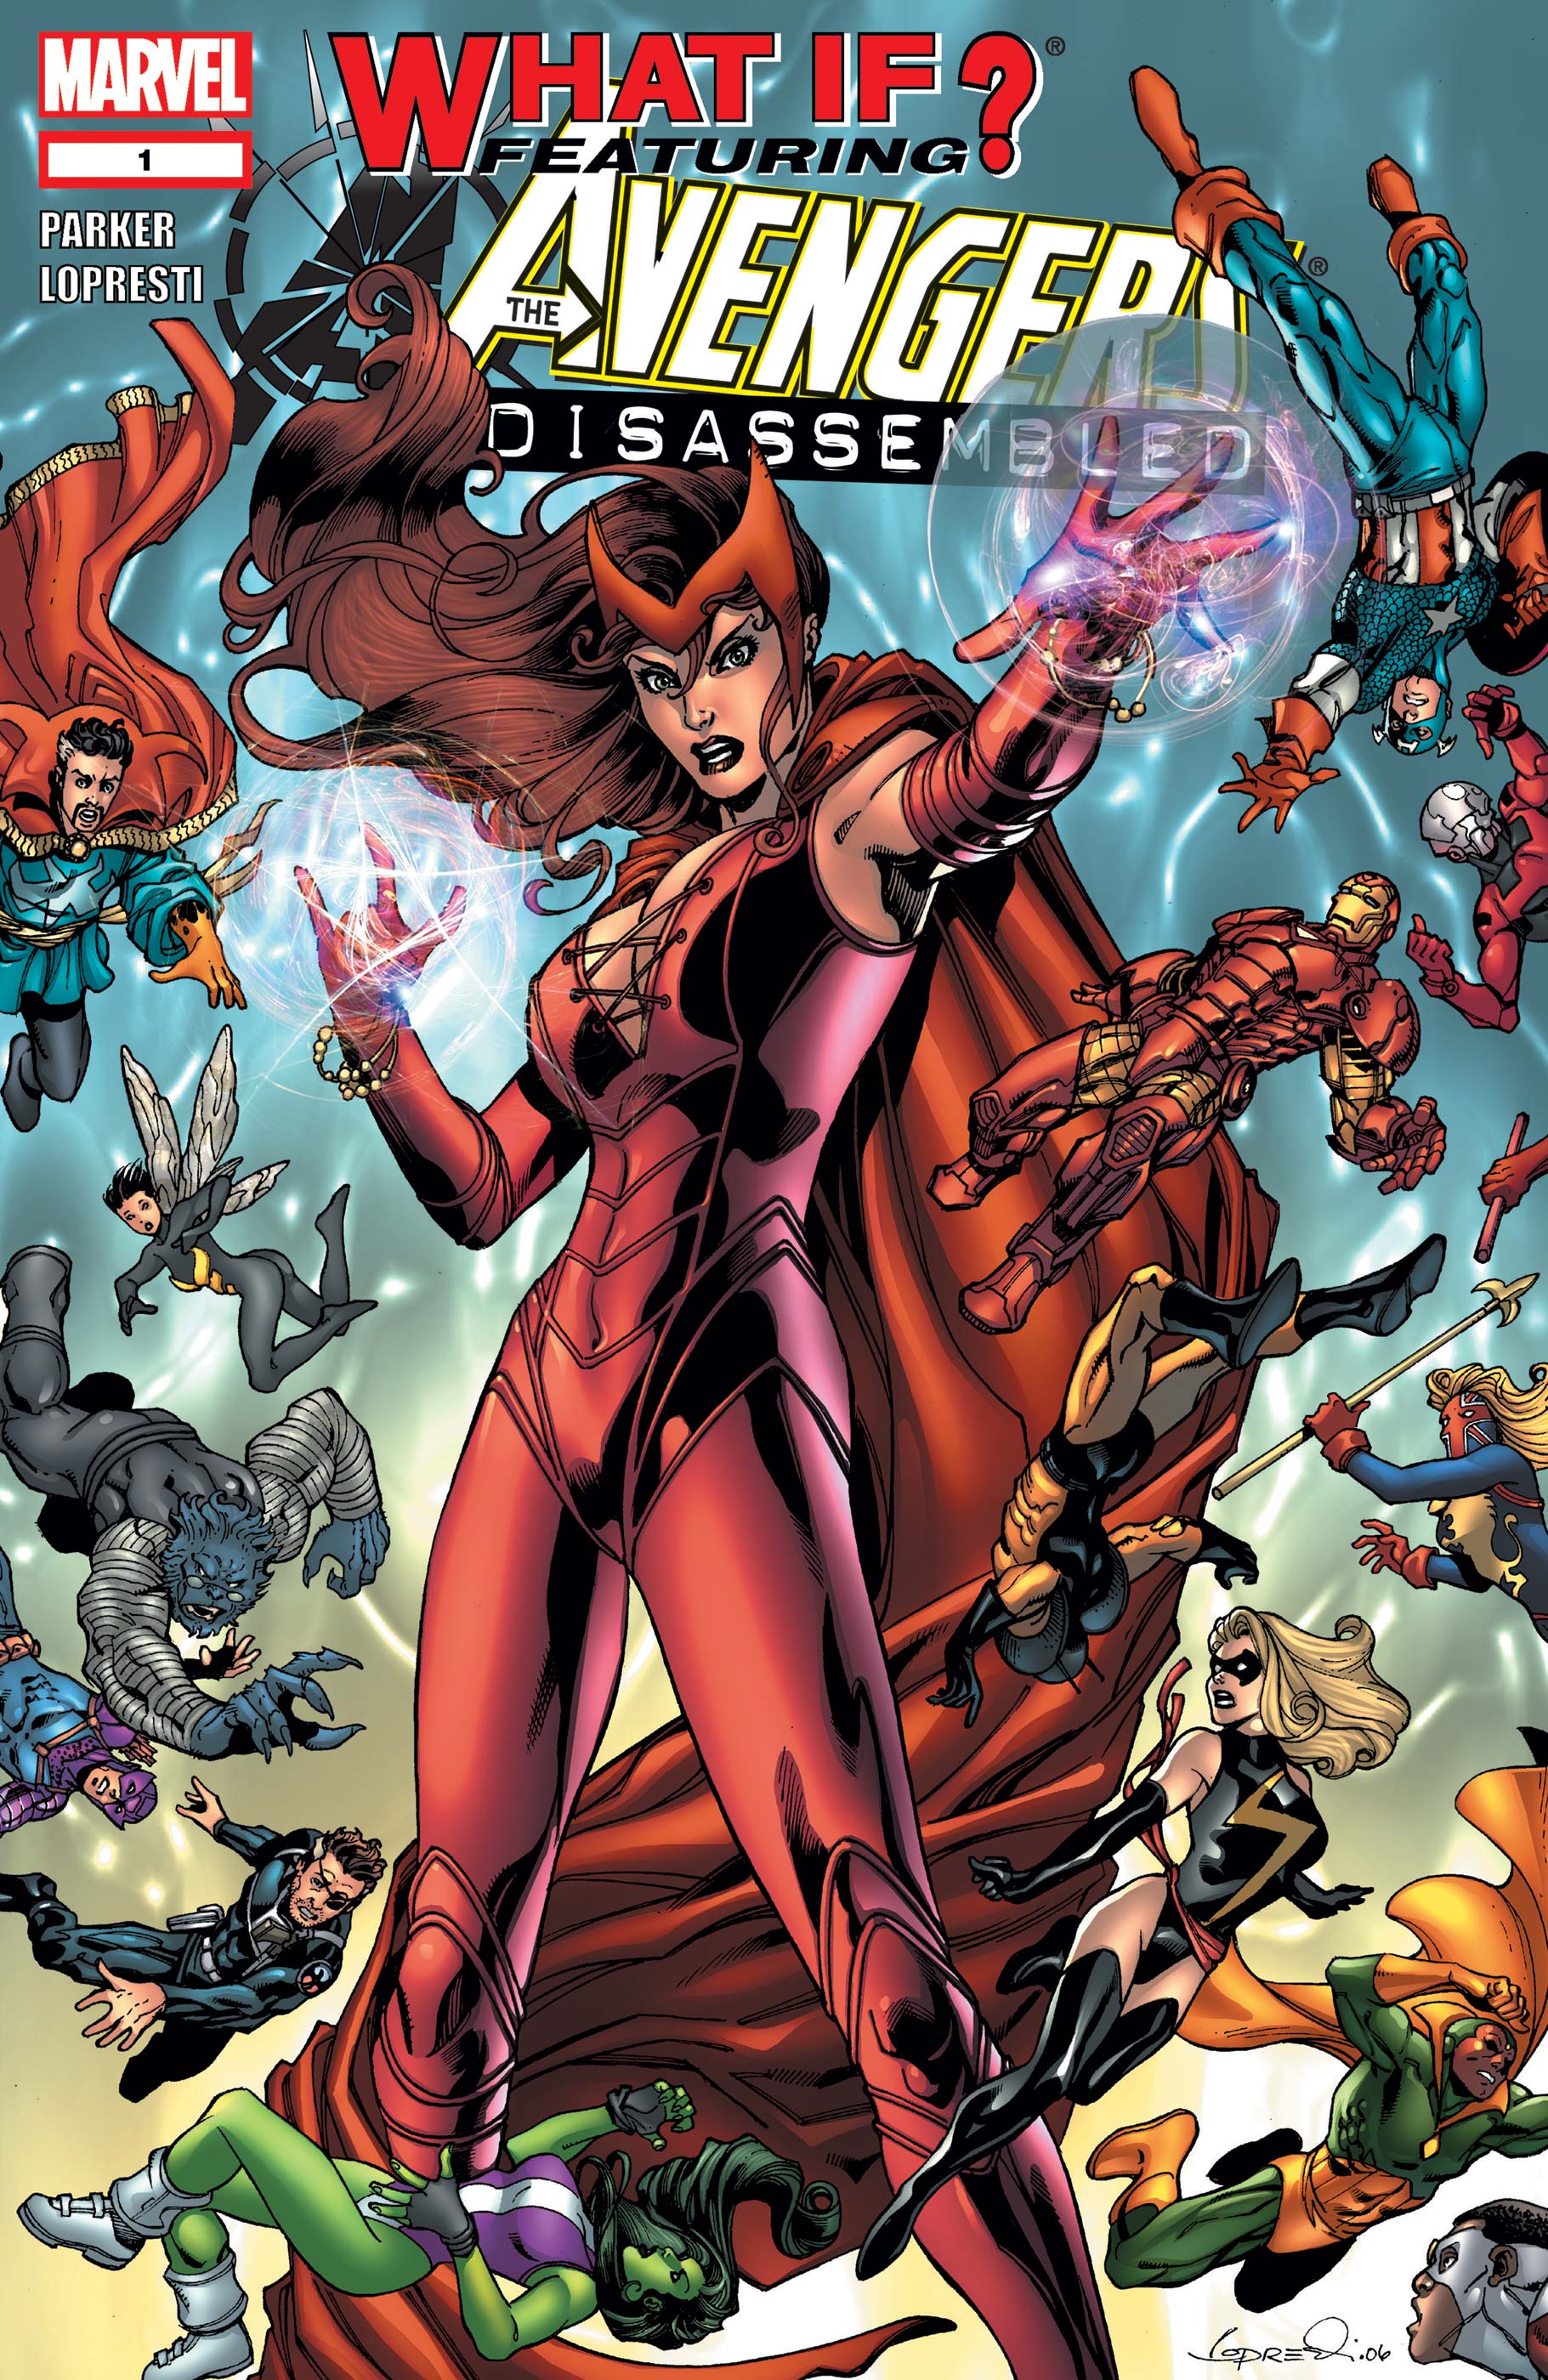 What If? Avengers Disassembled (2006) #1